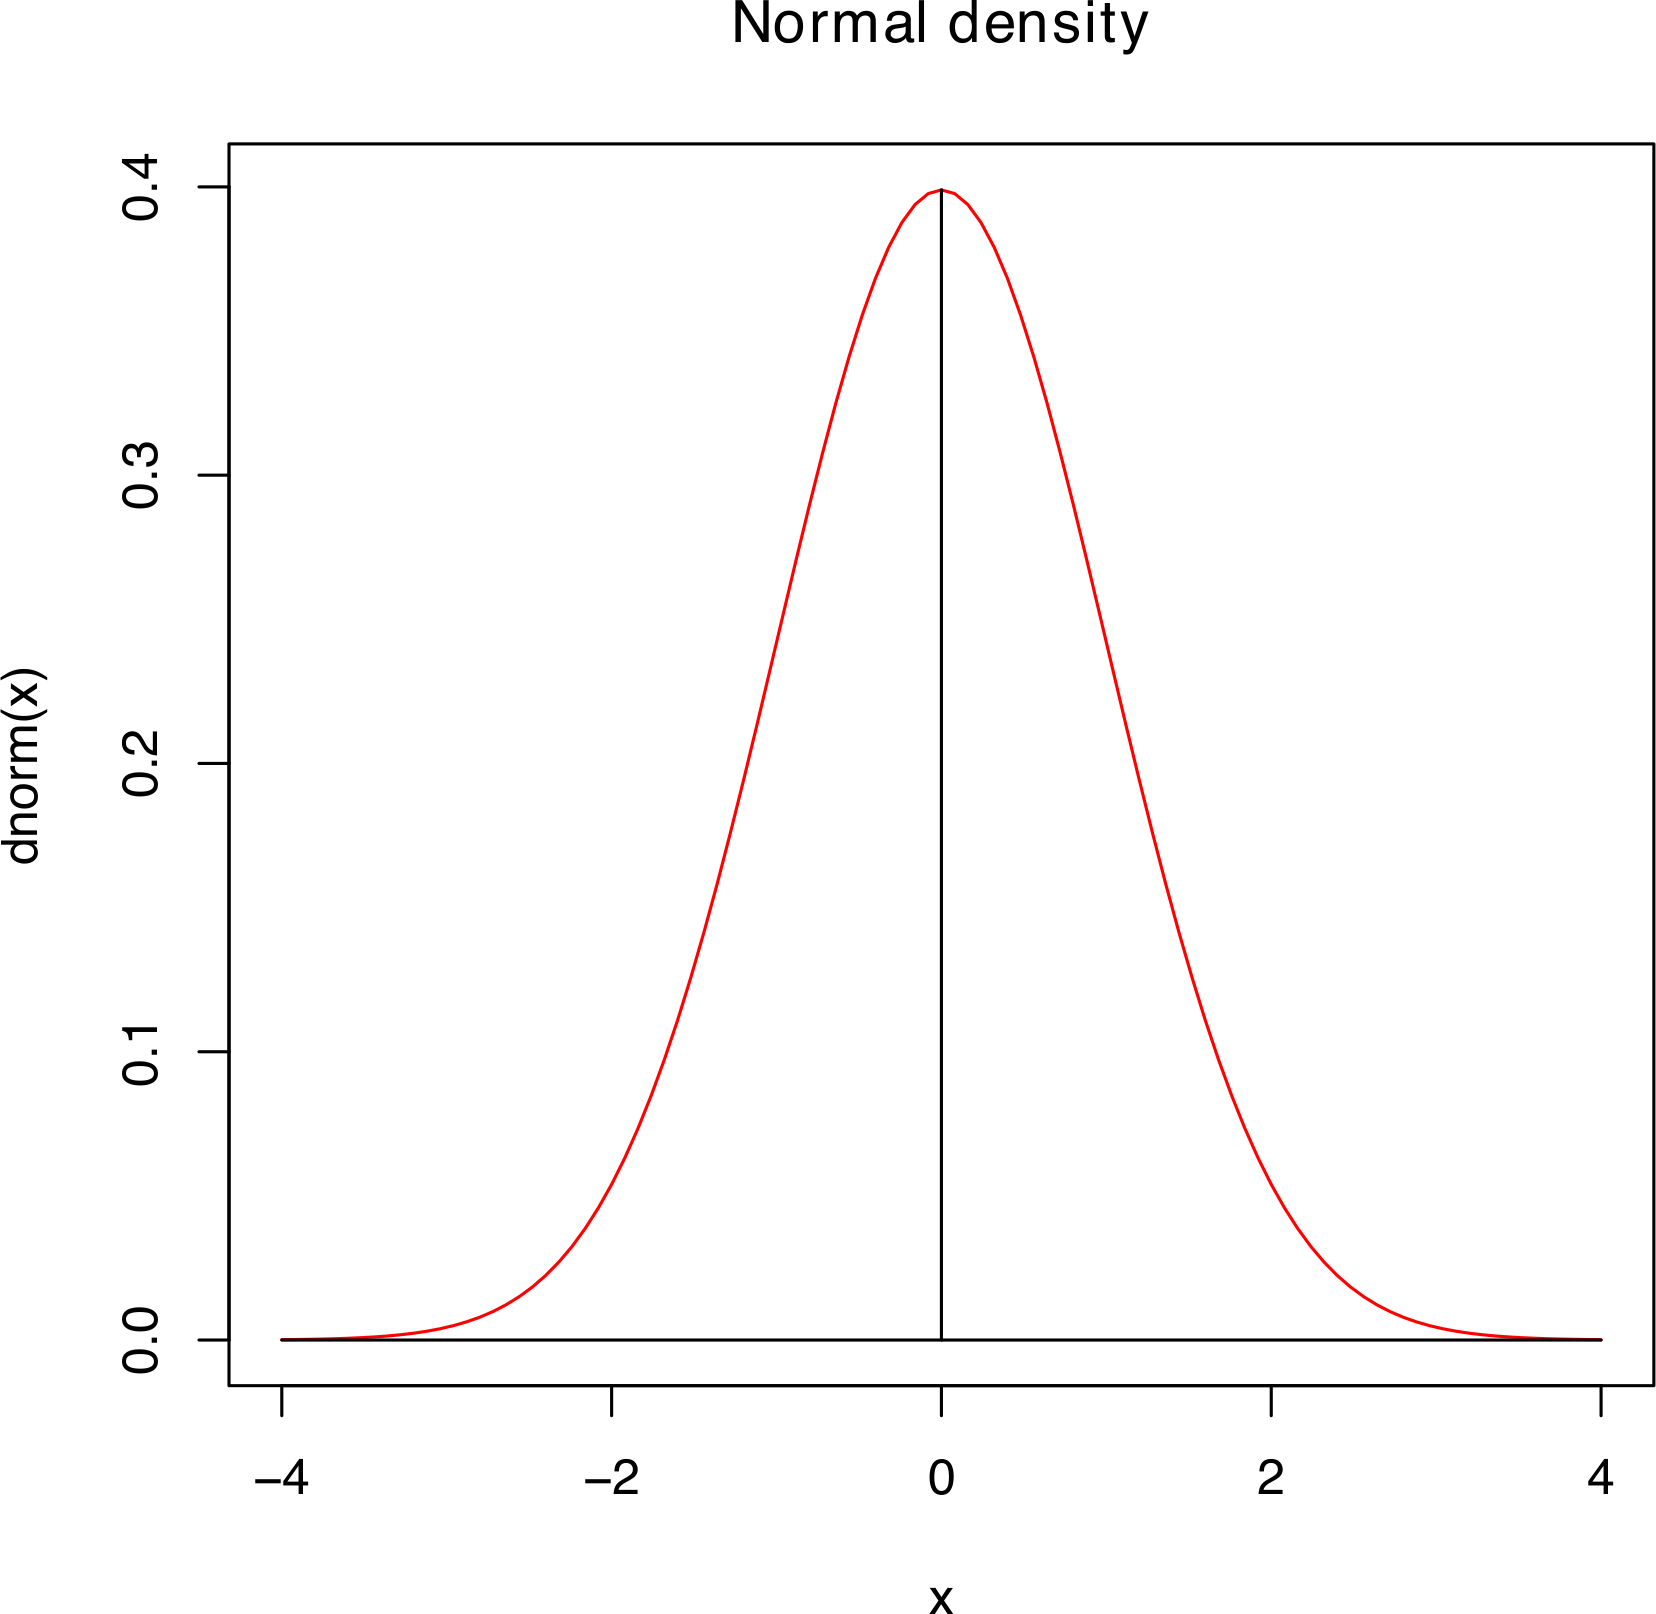 P.d.f. and c.d.f. for the standard normal distribution.